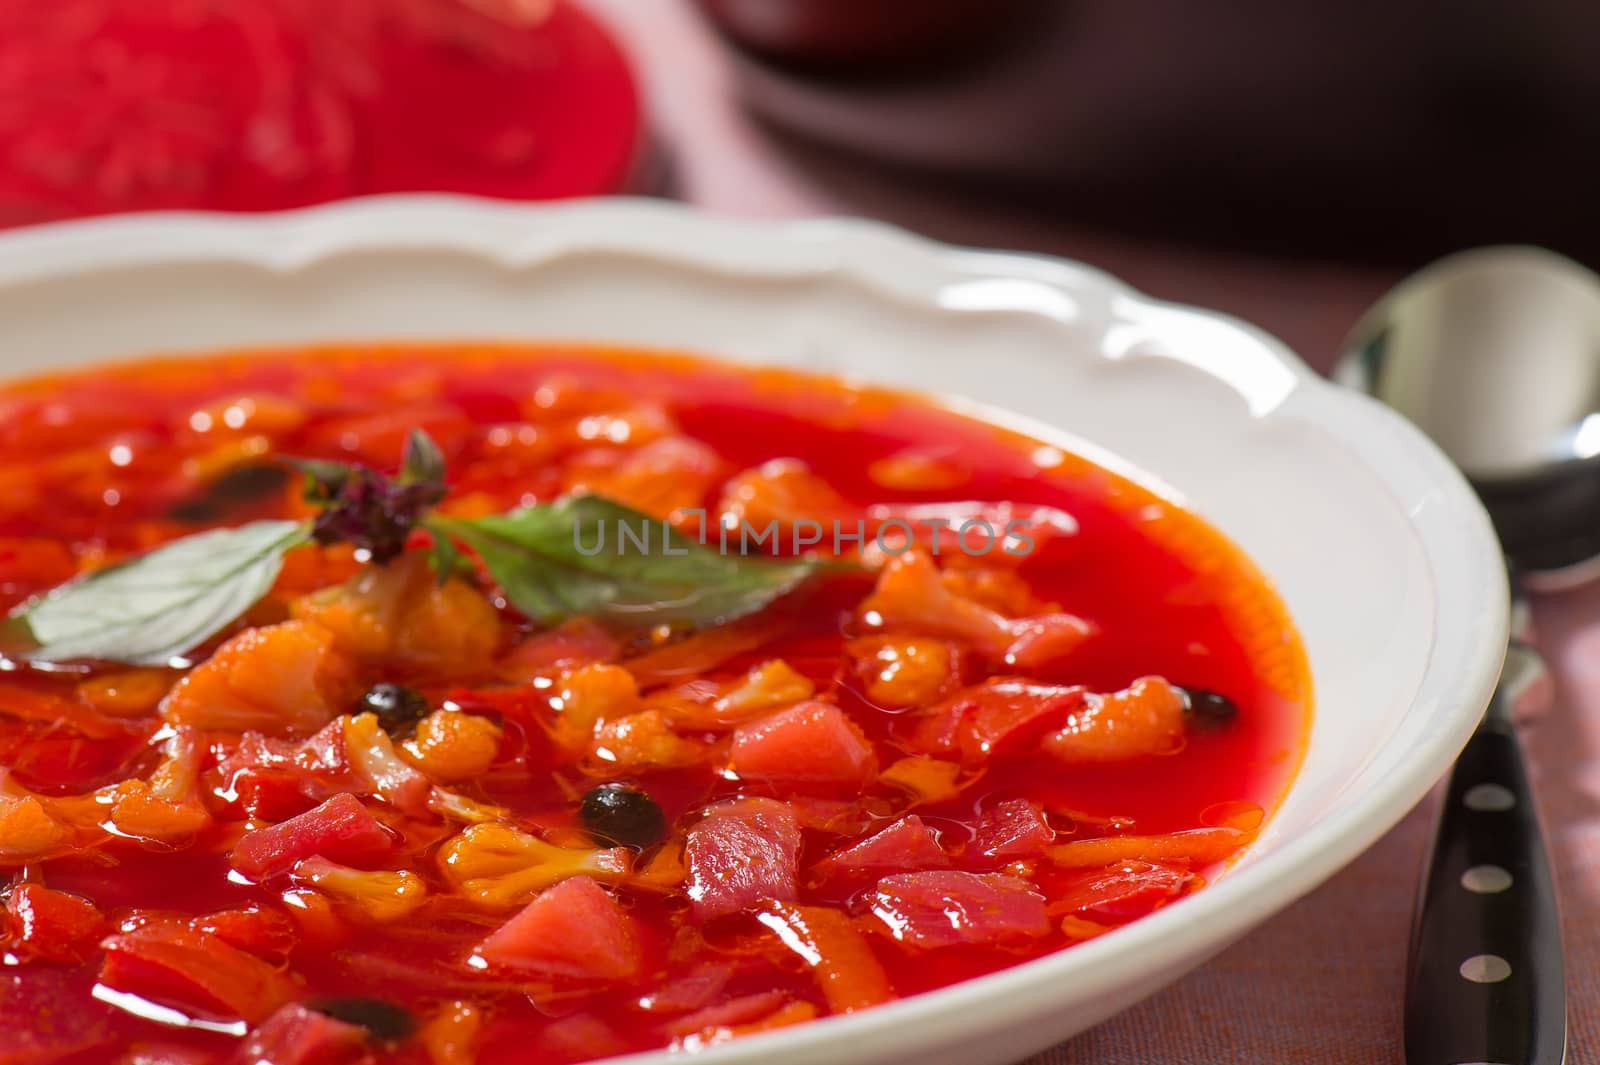 Сold vegetable soup in a white ceramic plate